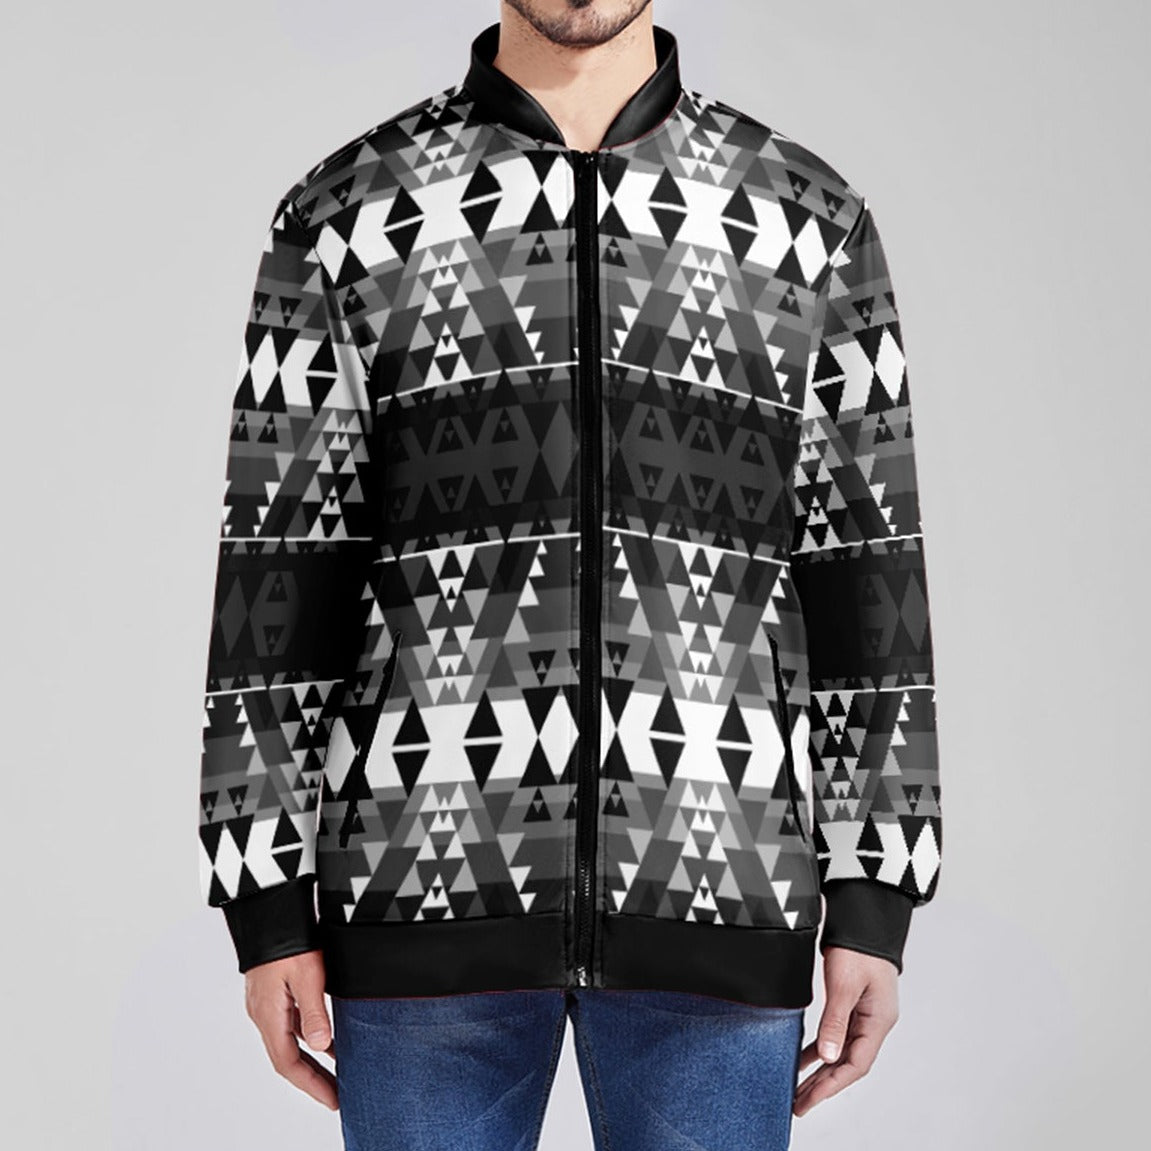 Writing on Stone Black and White Youth Zippered Collared Lightweight Jacket